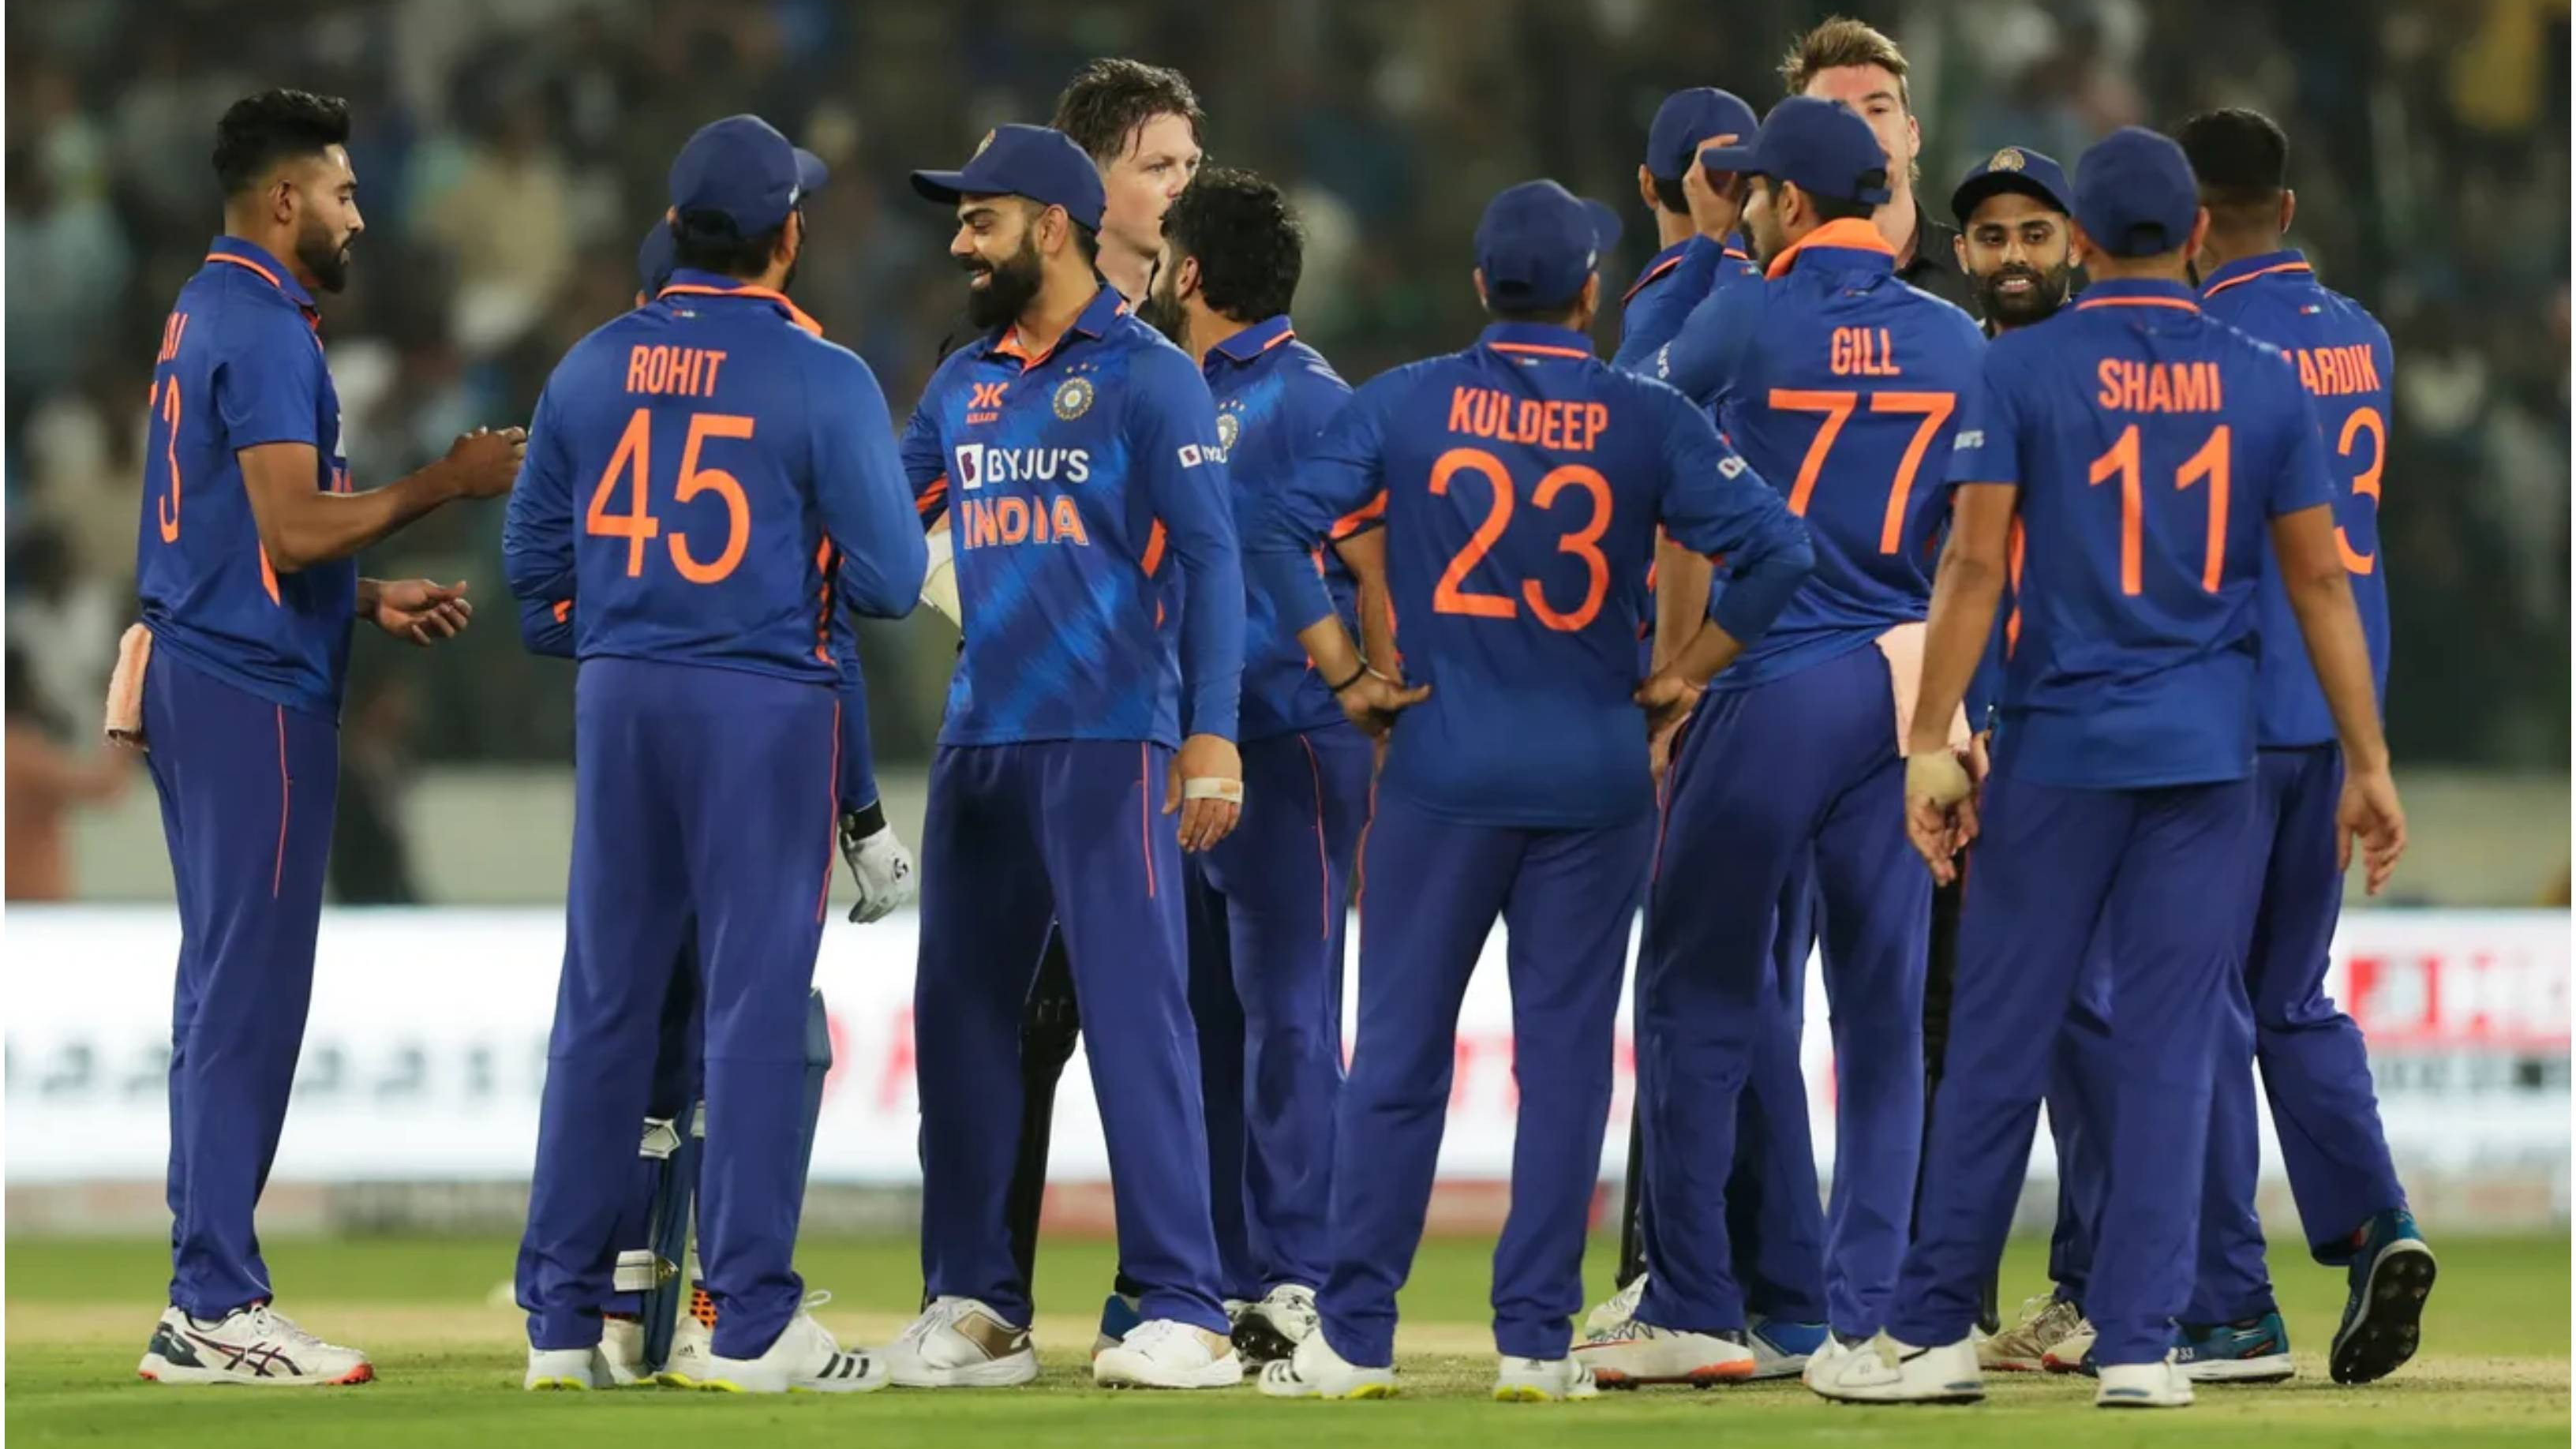 IND v NZ 2023: ICC imposes 60 percent fine on Team India for slow over-rate in first ODI